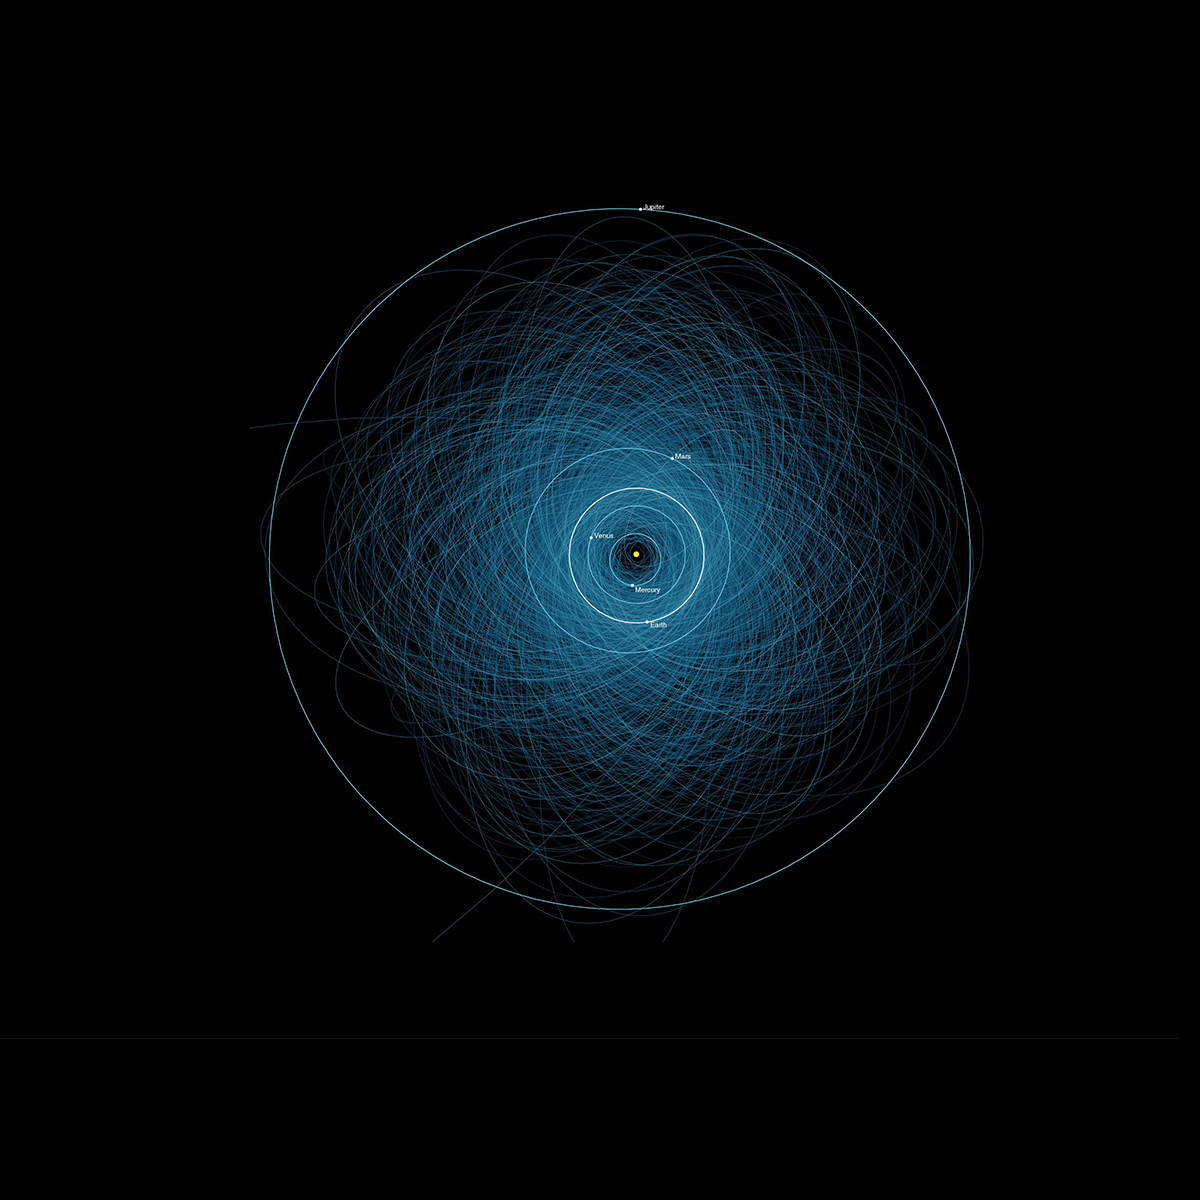 This graphic shows the orbits of all the known Potentially Hazardous Asteroids (PHAs), numbering over 1,400 as of early 2013. 